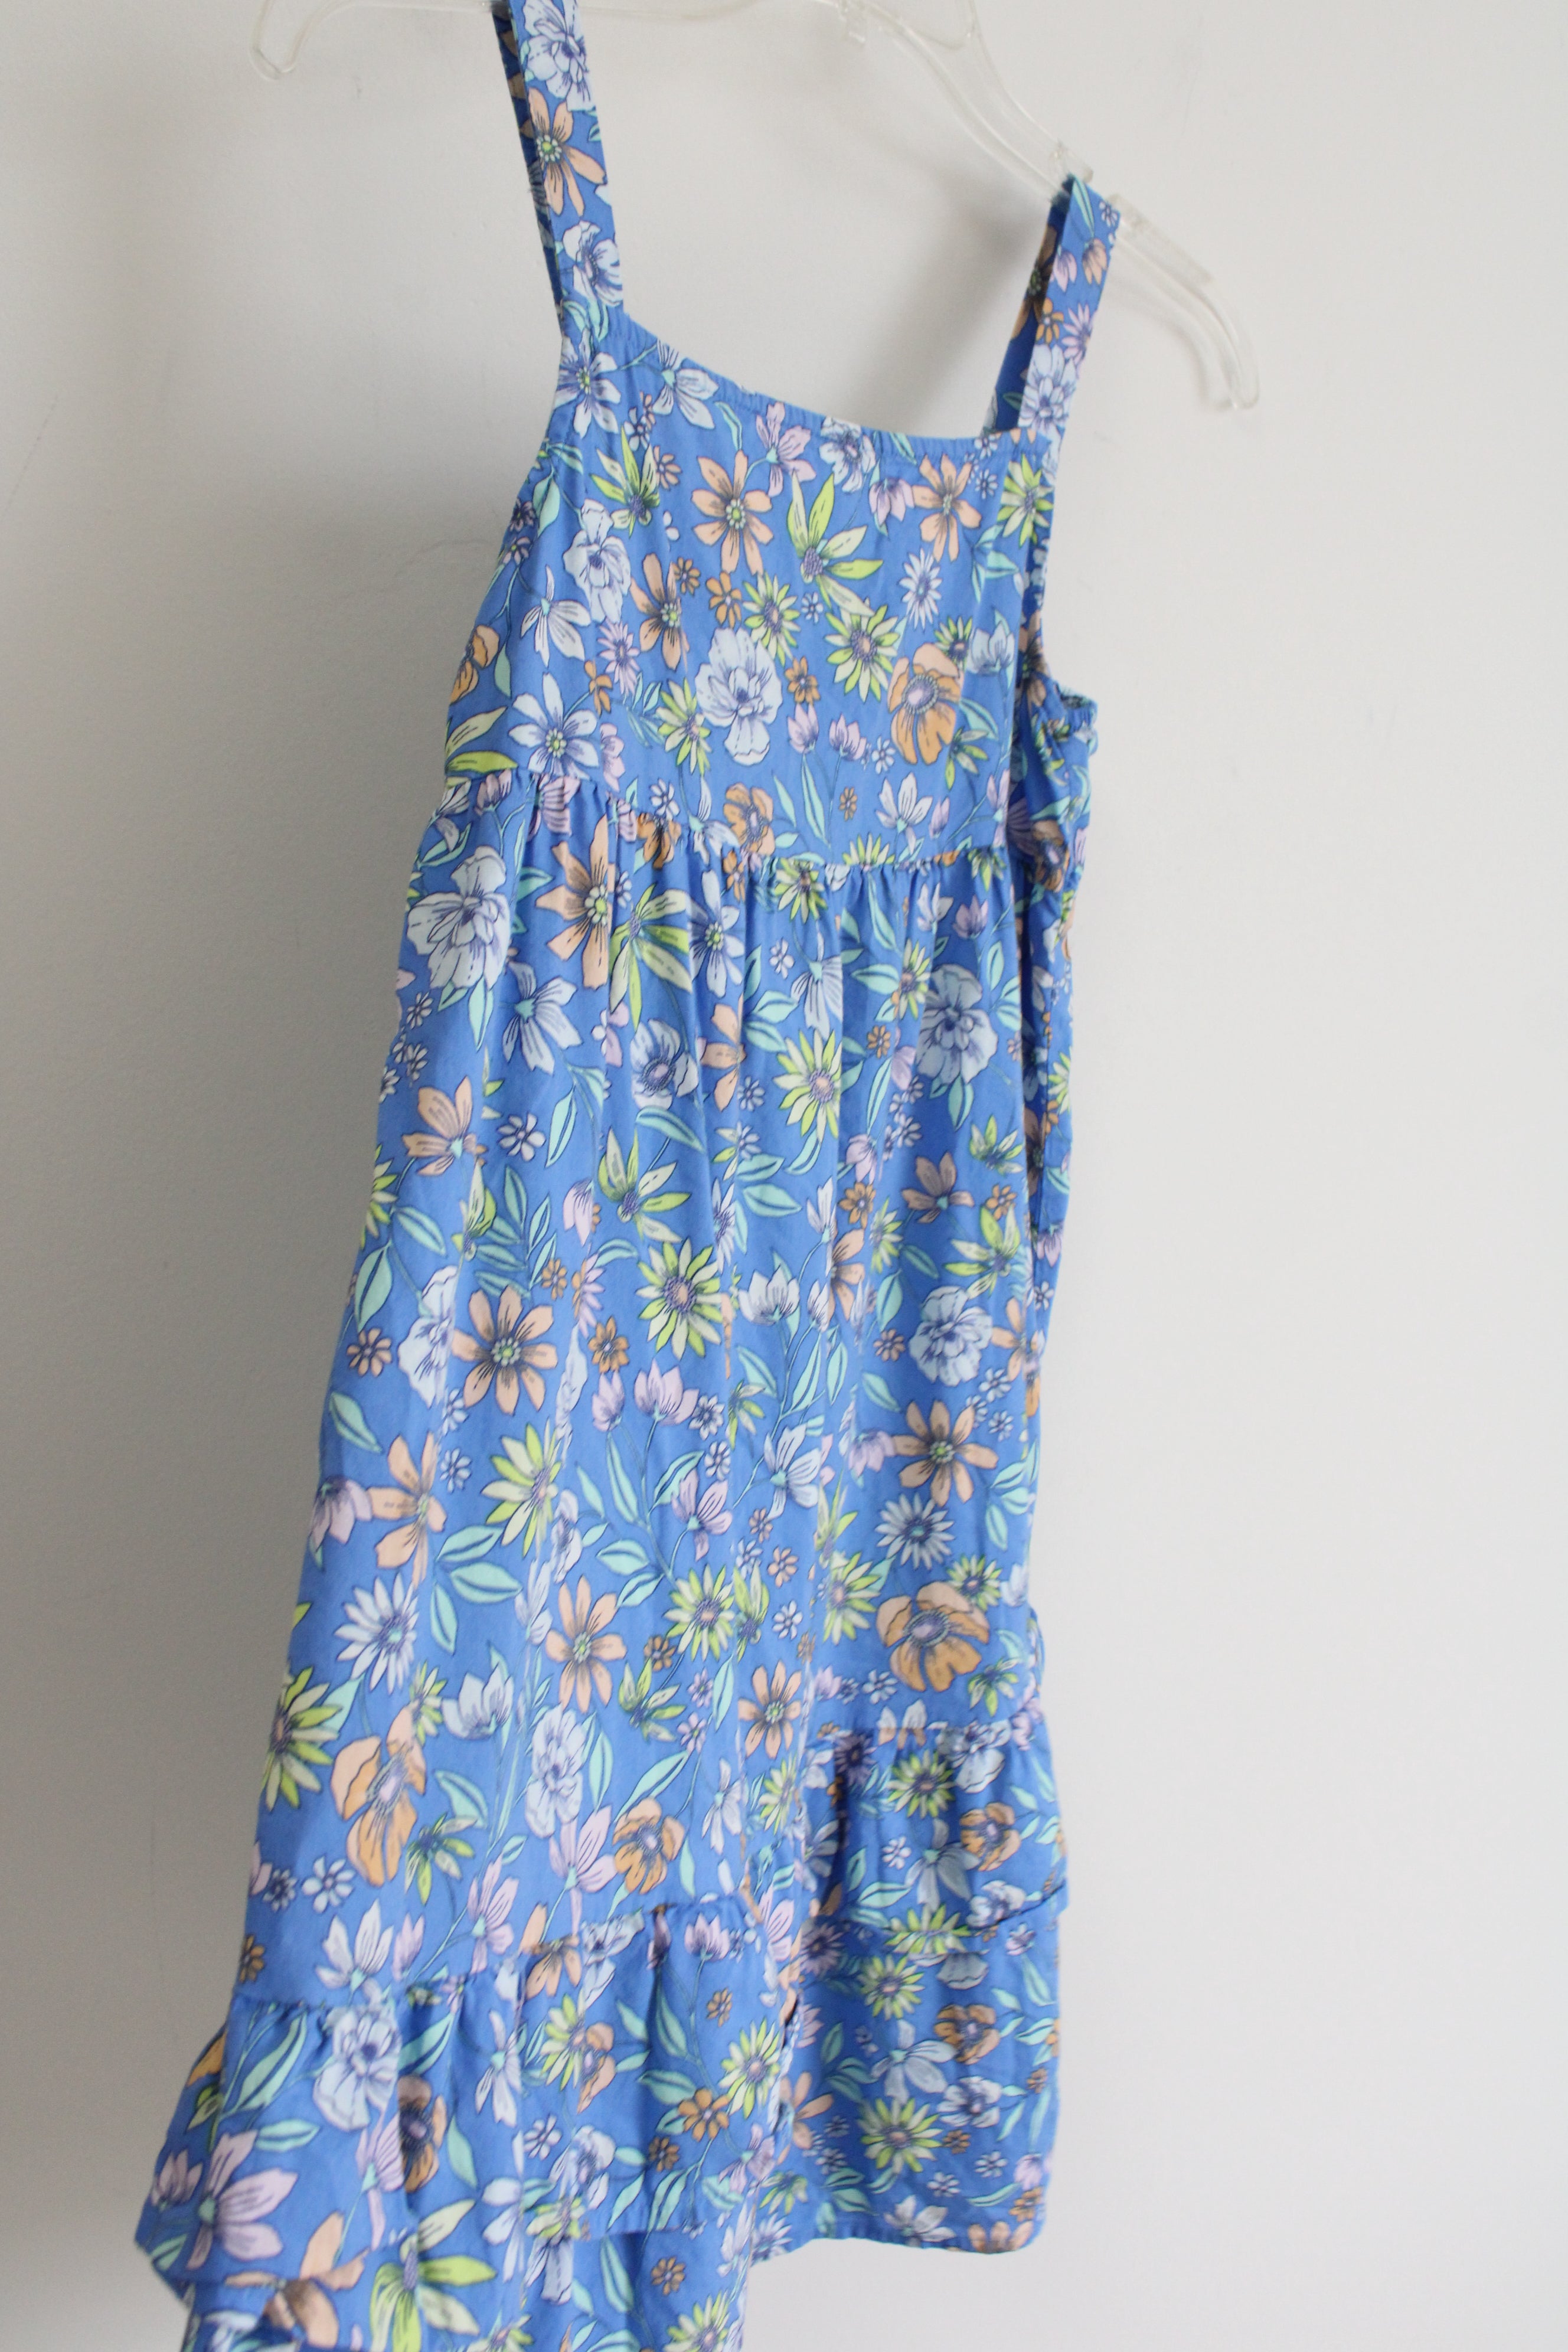 Old Navy Blue Floral Dress | Youth L (10/12)